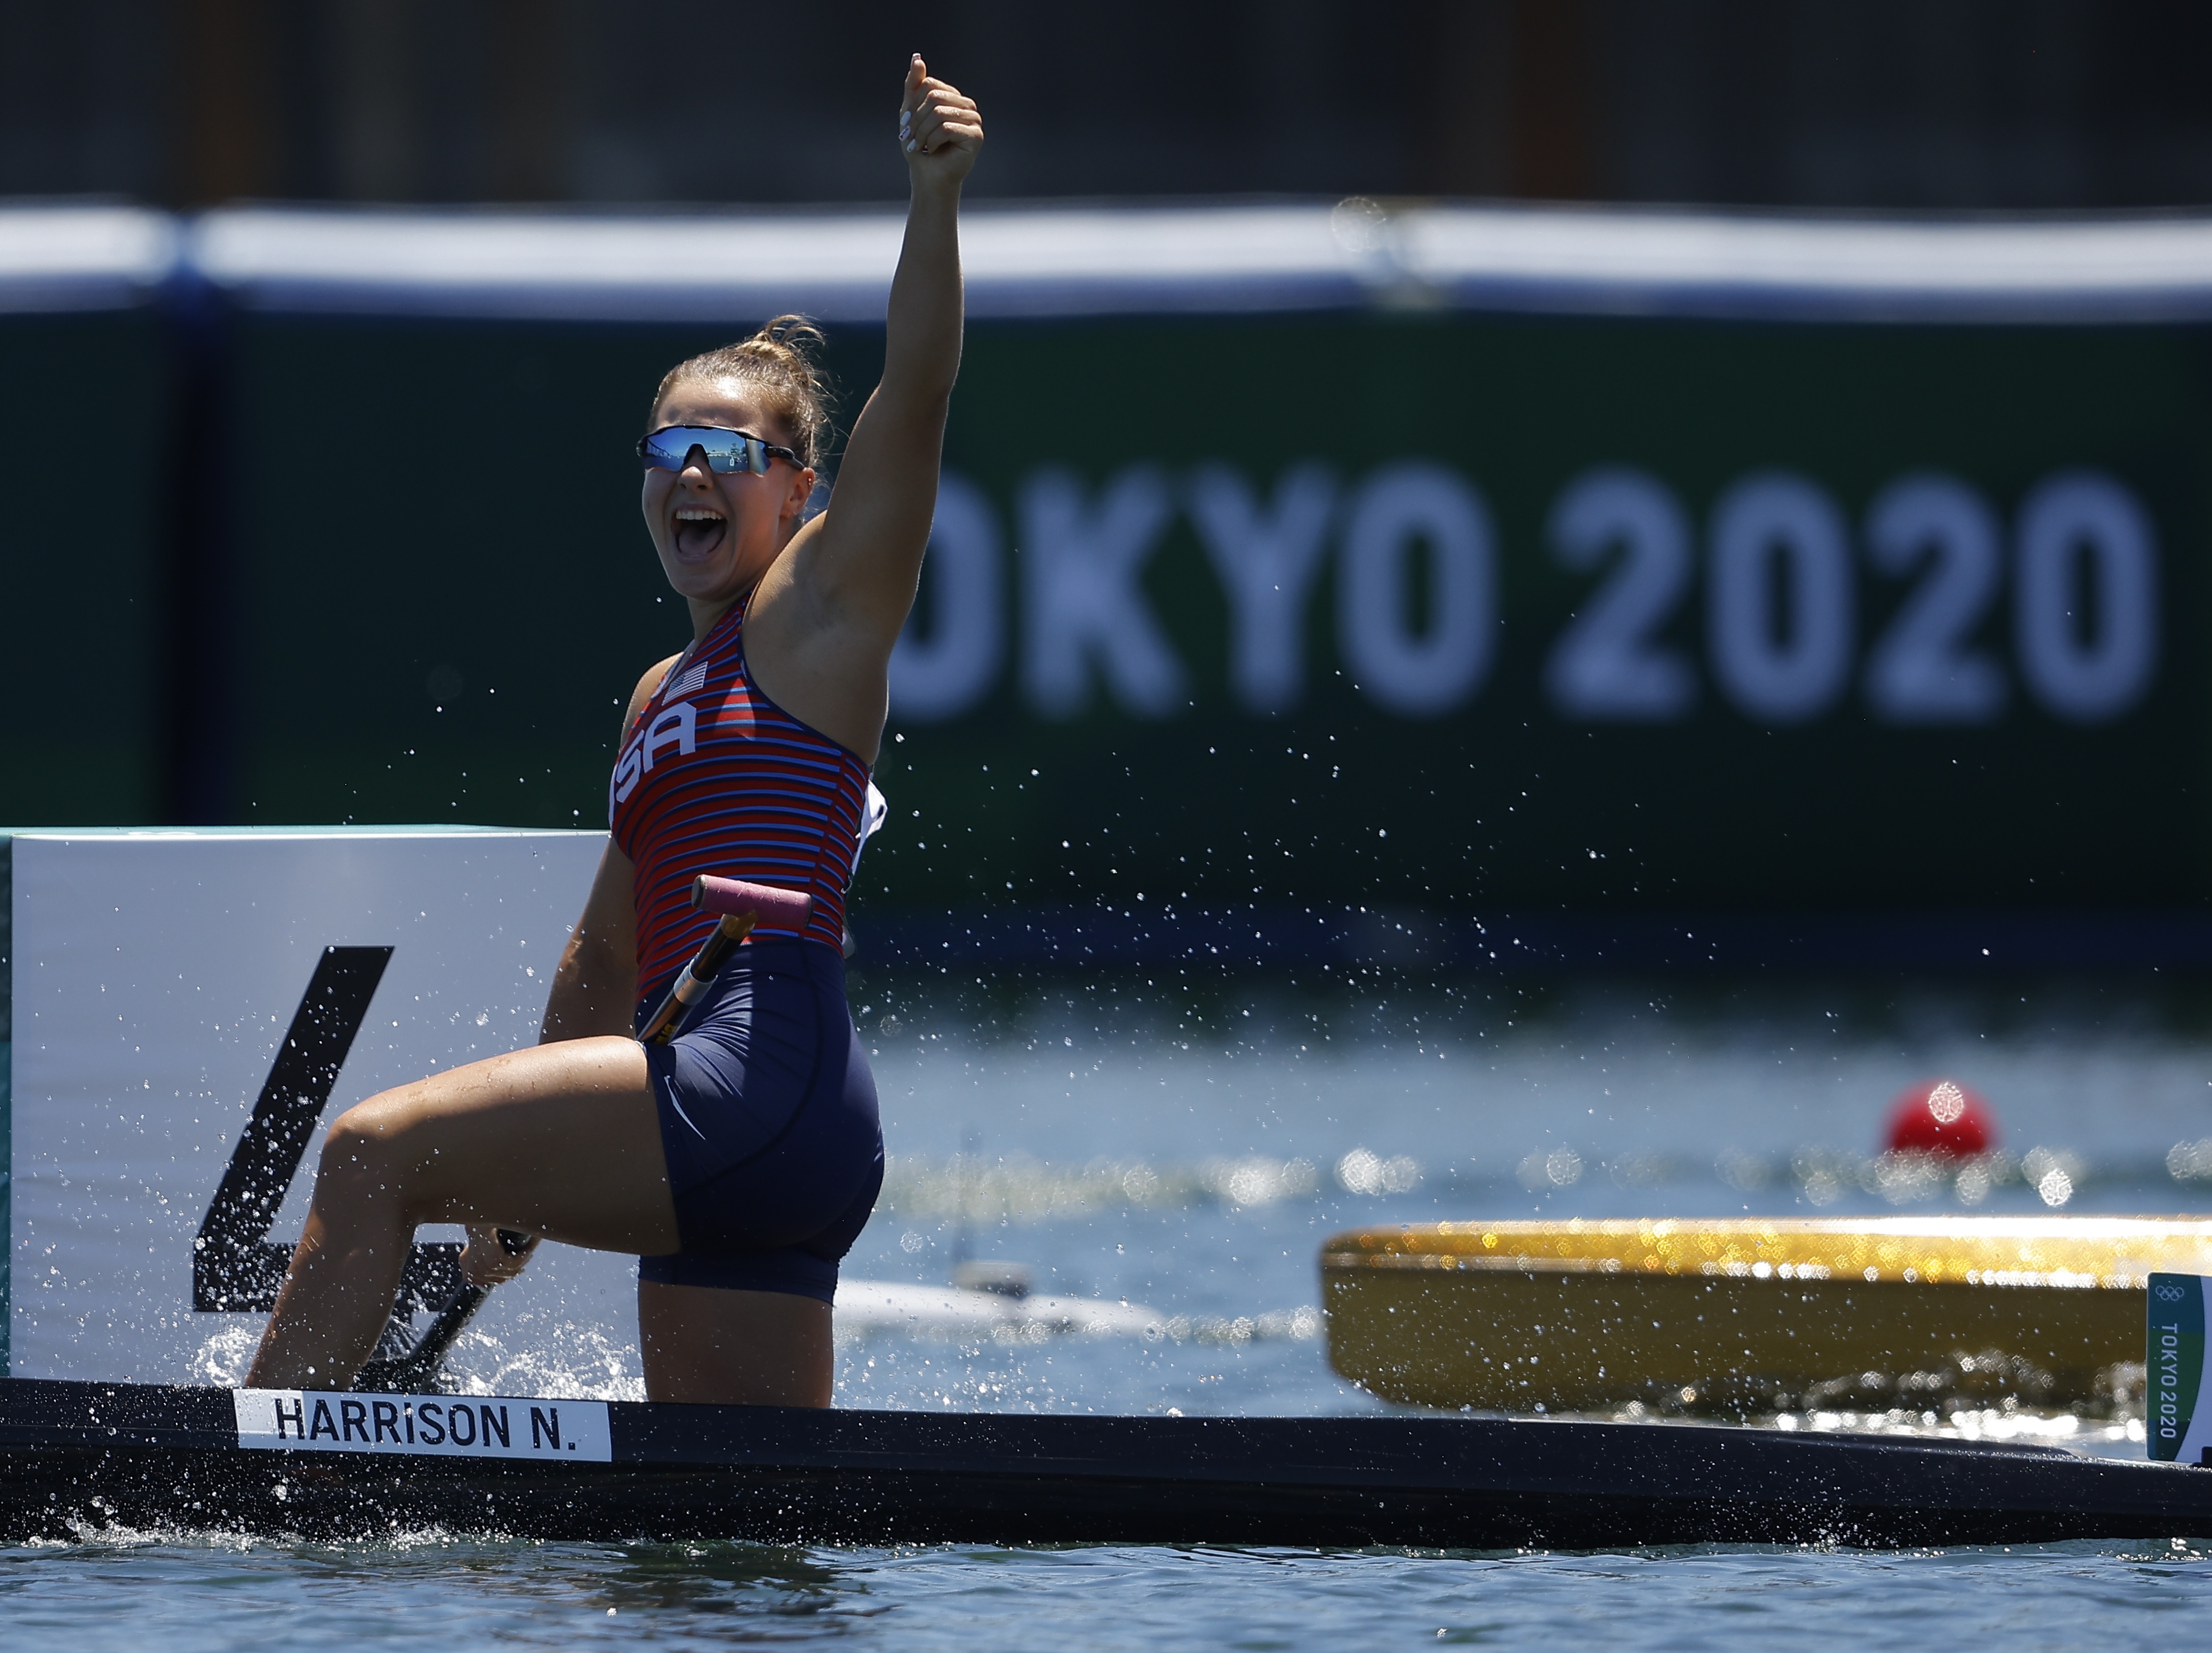 Tokyo 2020 Olympics - Canoe Sprint - Women's C1 200m - Final A - Sea Forest Waterway, Tokyo, Japan - August 5, 2021. Nevin Harrison of the United States celebrates after winning gold REUTERS/Maxim Shemetov